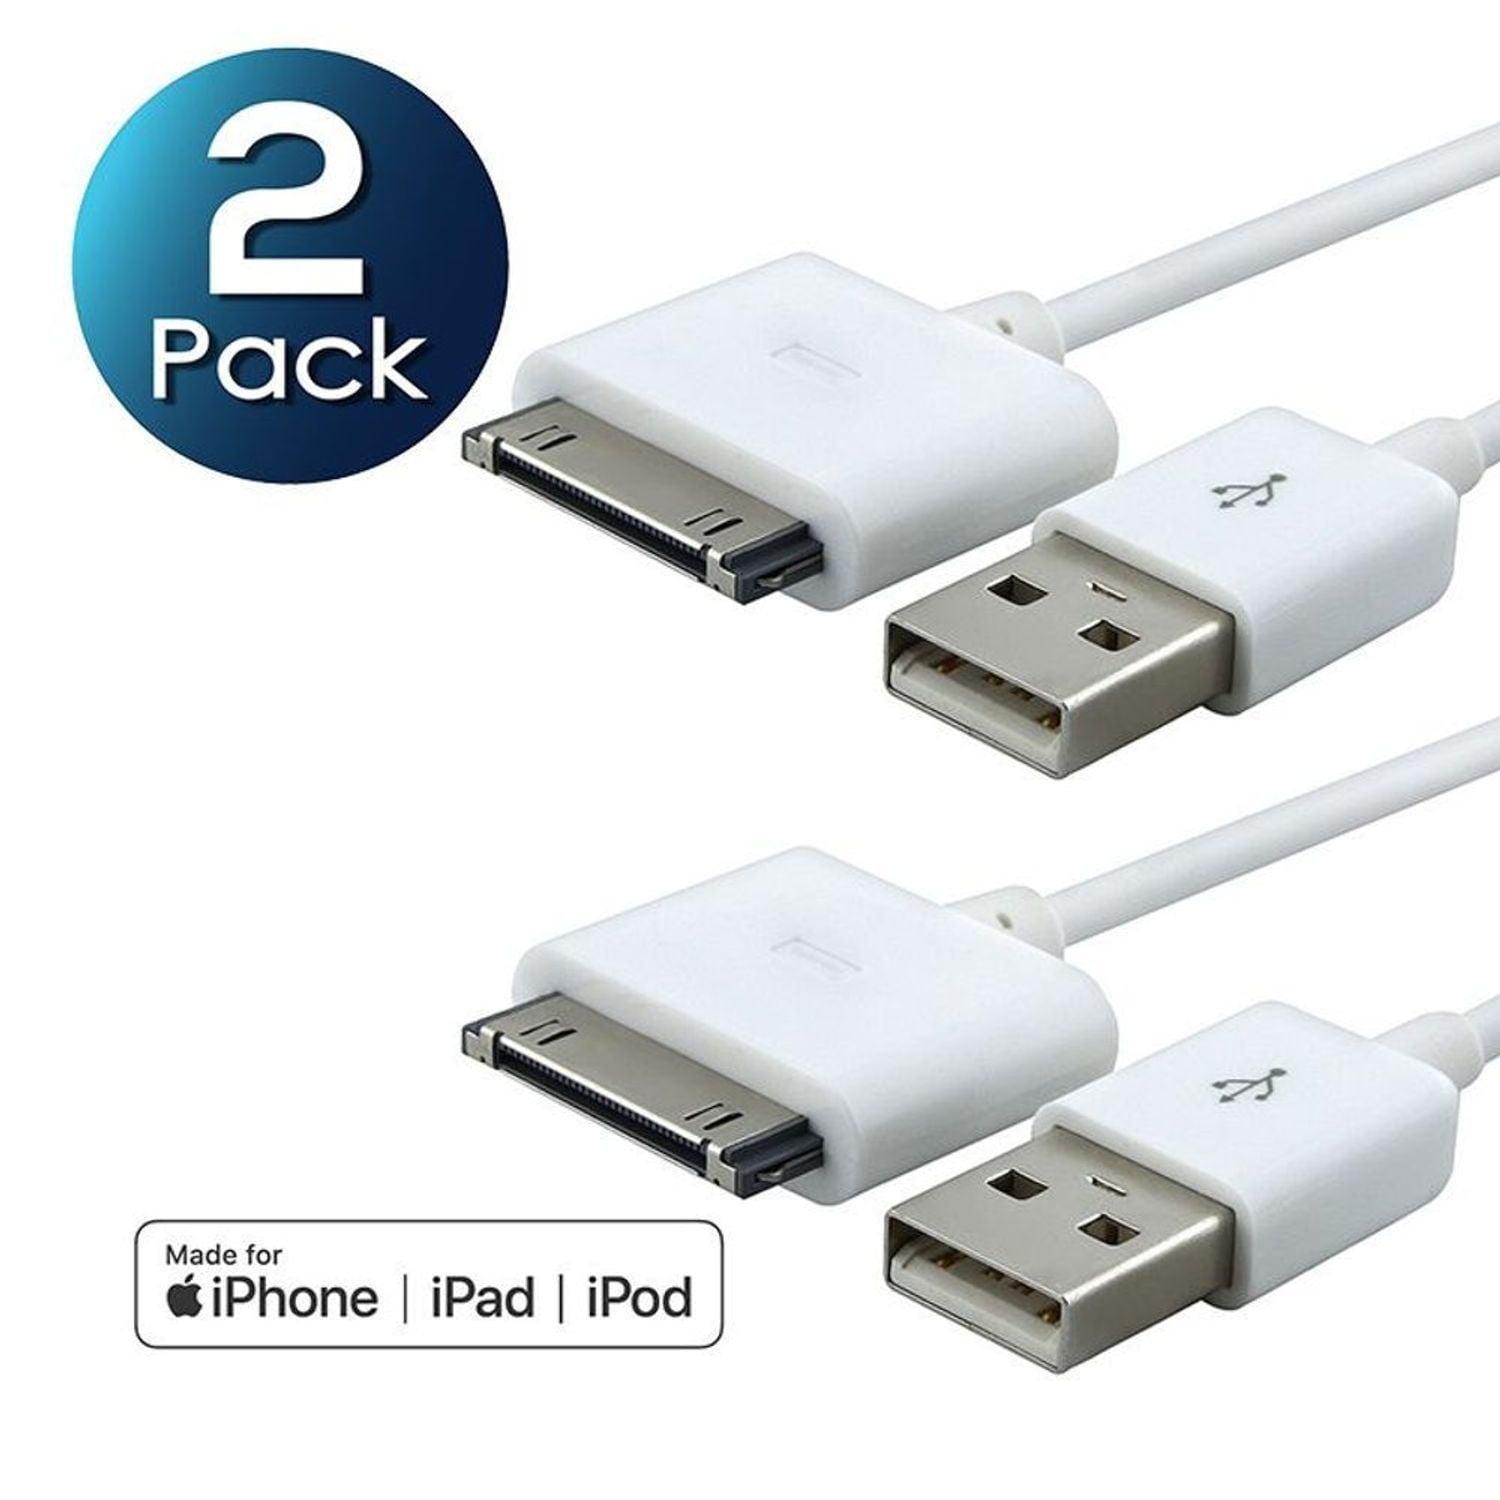 2X Rapid USB Wall Charger Adapter & 30 Pin USB Cable for iPad 2nd Generation